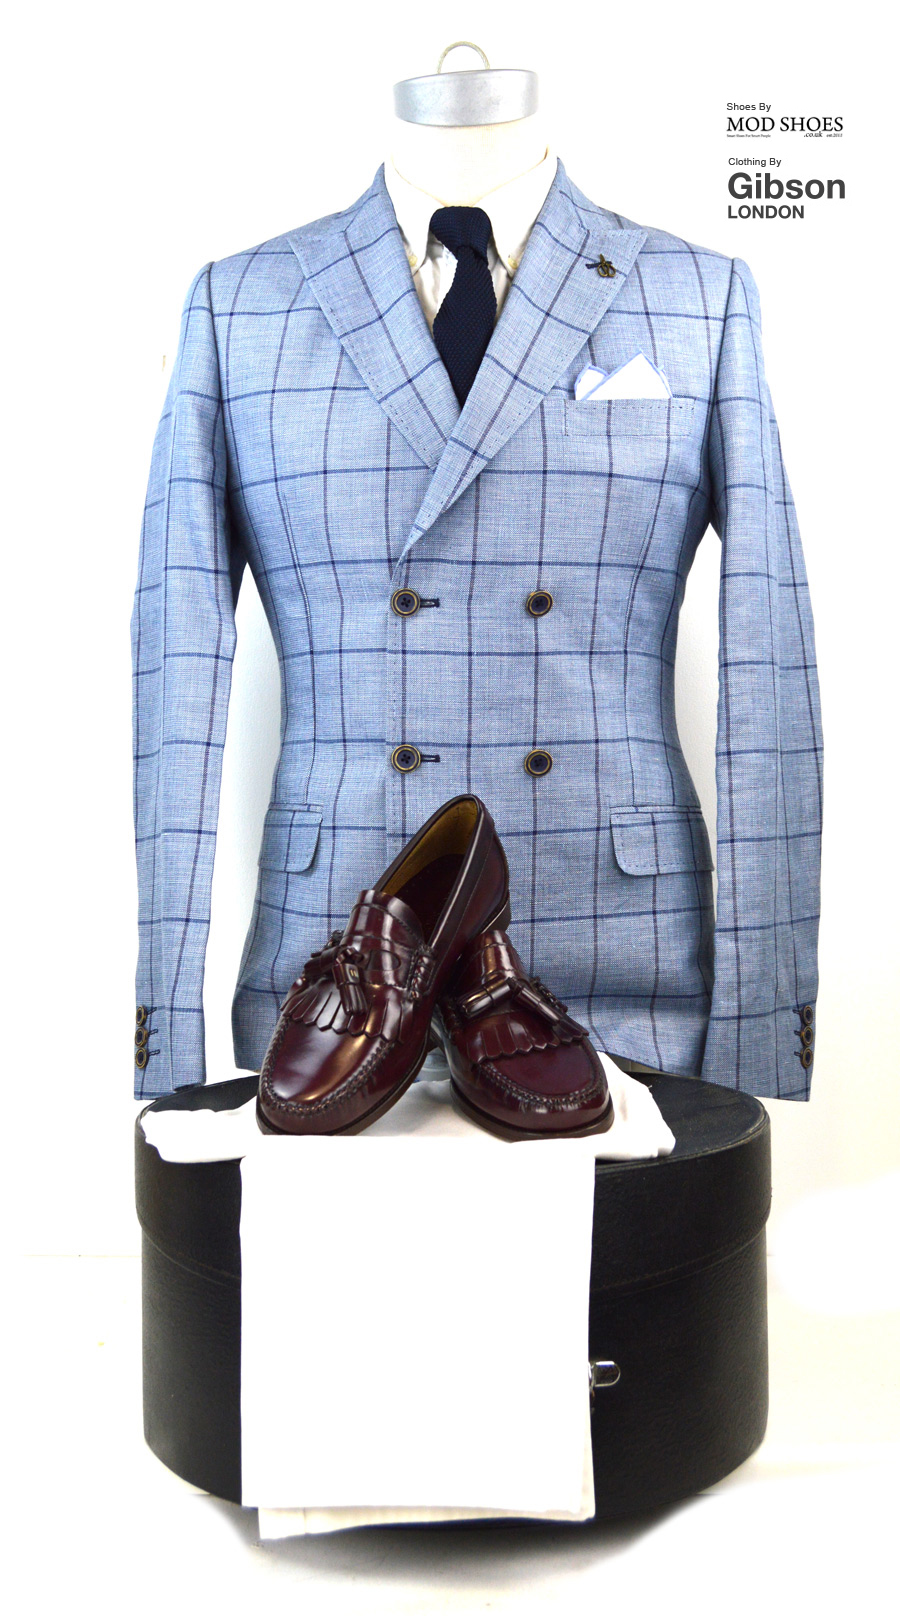 modshoes-oxblood-dukes-with-light-blue-jacket-from-gibson-clothing